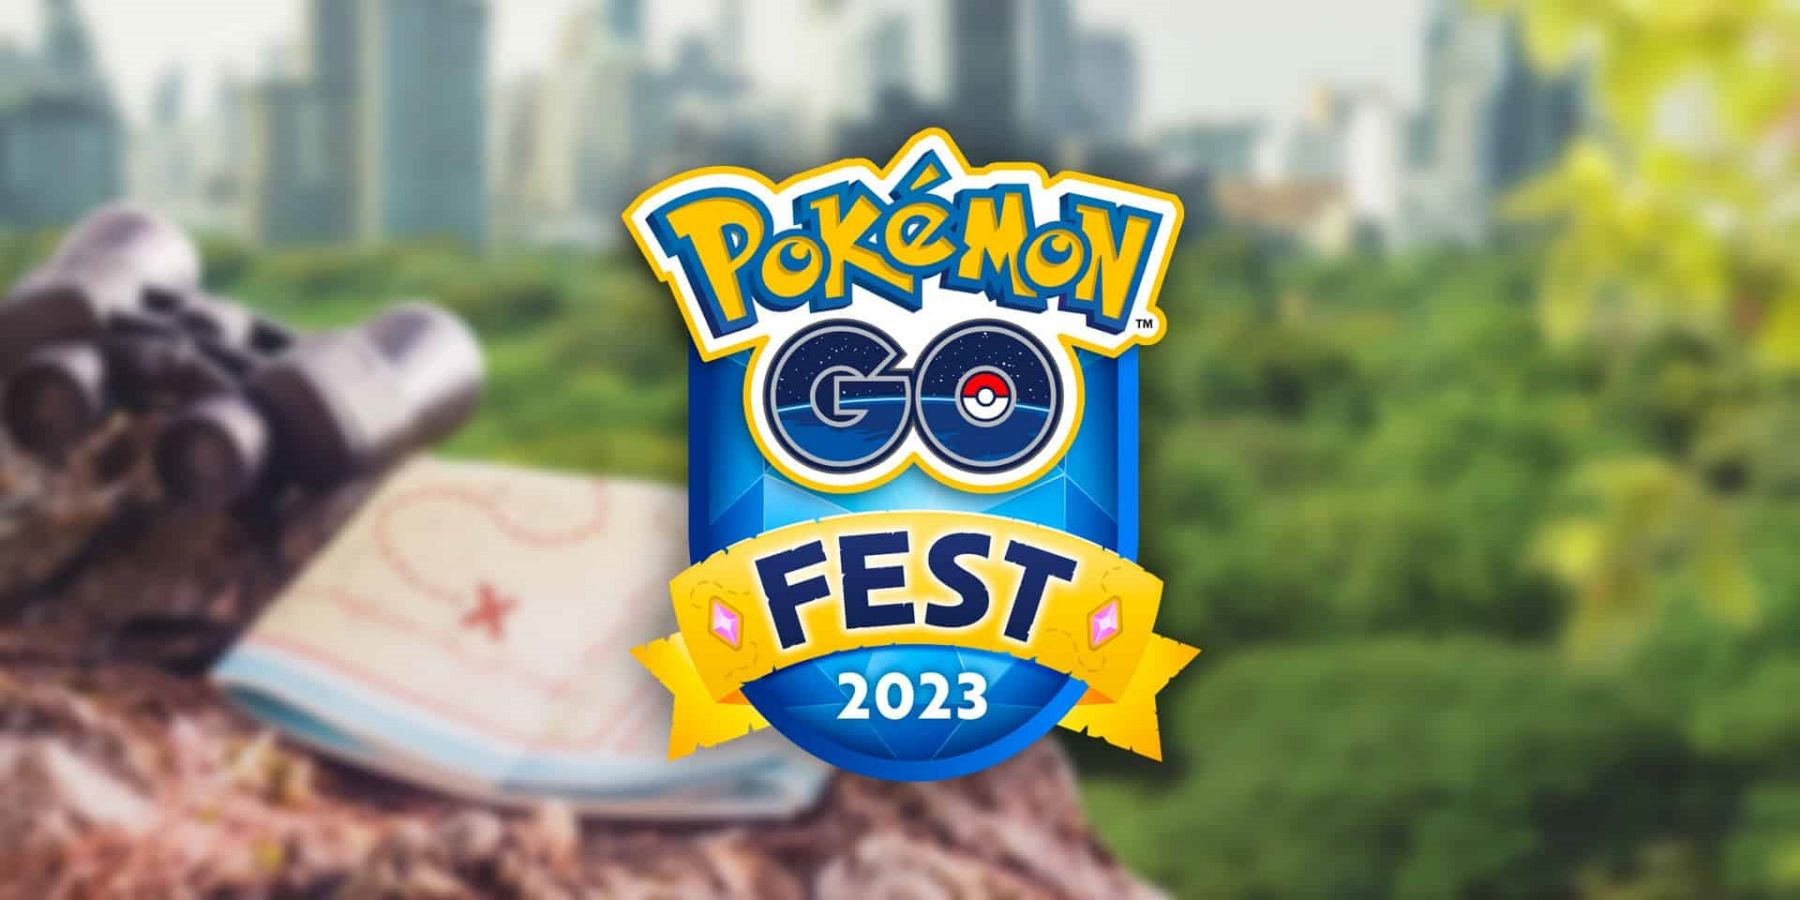 Pokemon GO Fest Confirms Dates and Locations for 2023